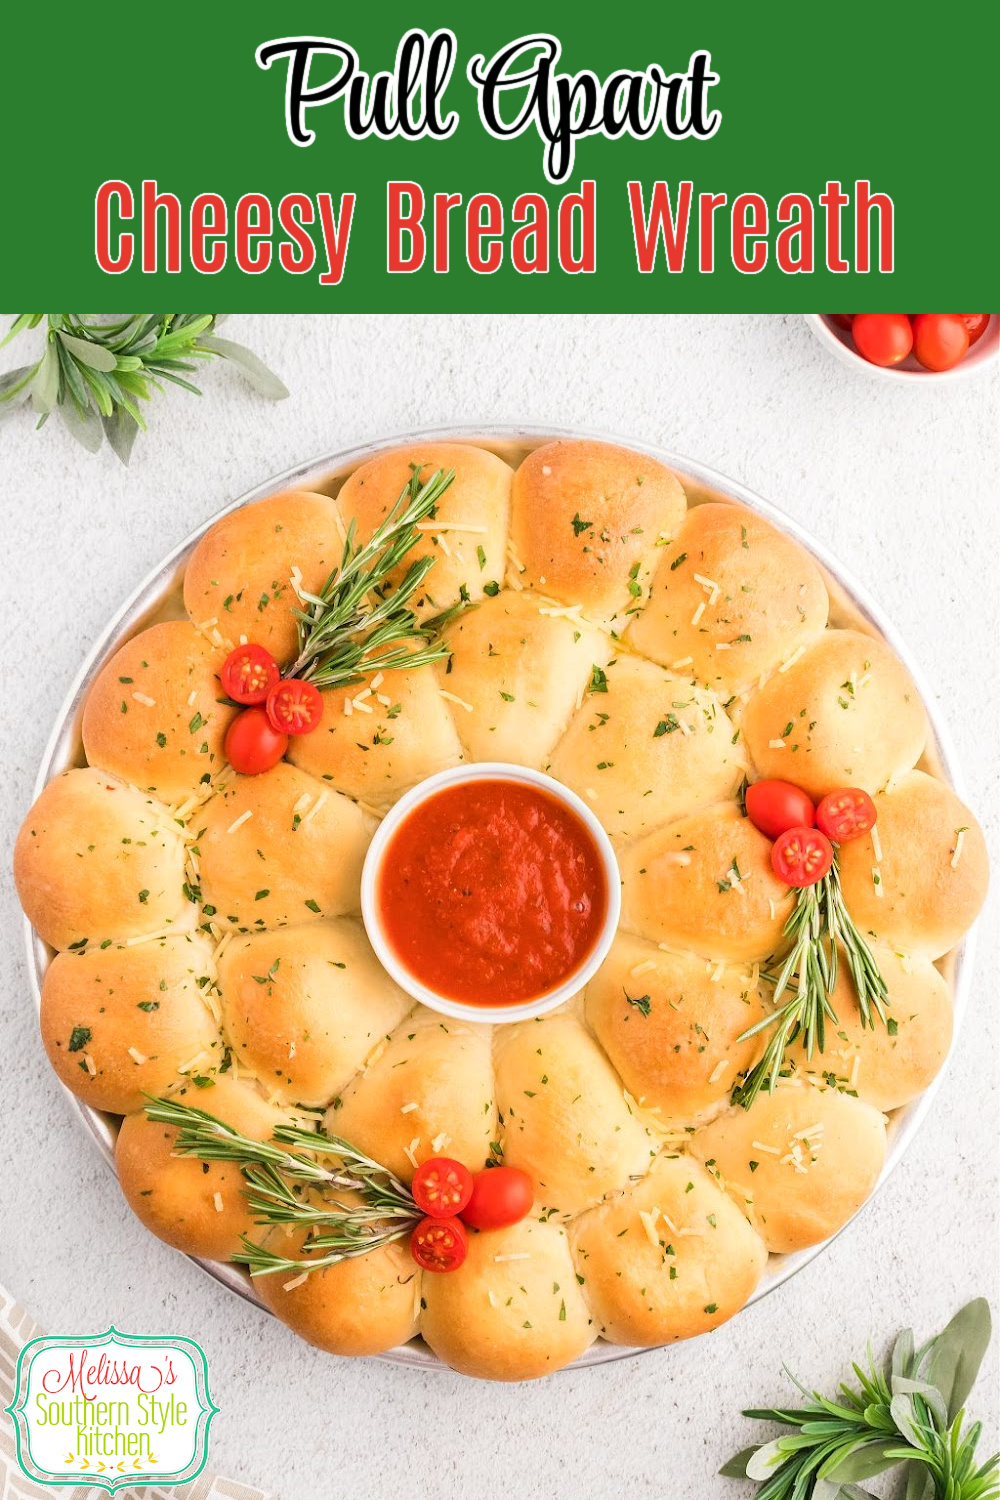 This gooey stuffed Pull Apart Cheesy Bread Wreath is guaranteed to bring holiday flair to the table #pullapartbread #cheesybread #garlicbread #pullapartbreadwreath #garlicbreadwreath #christmasrecipes #easybreadrecipes #easygarlicbread #pestobread